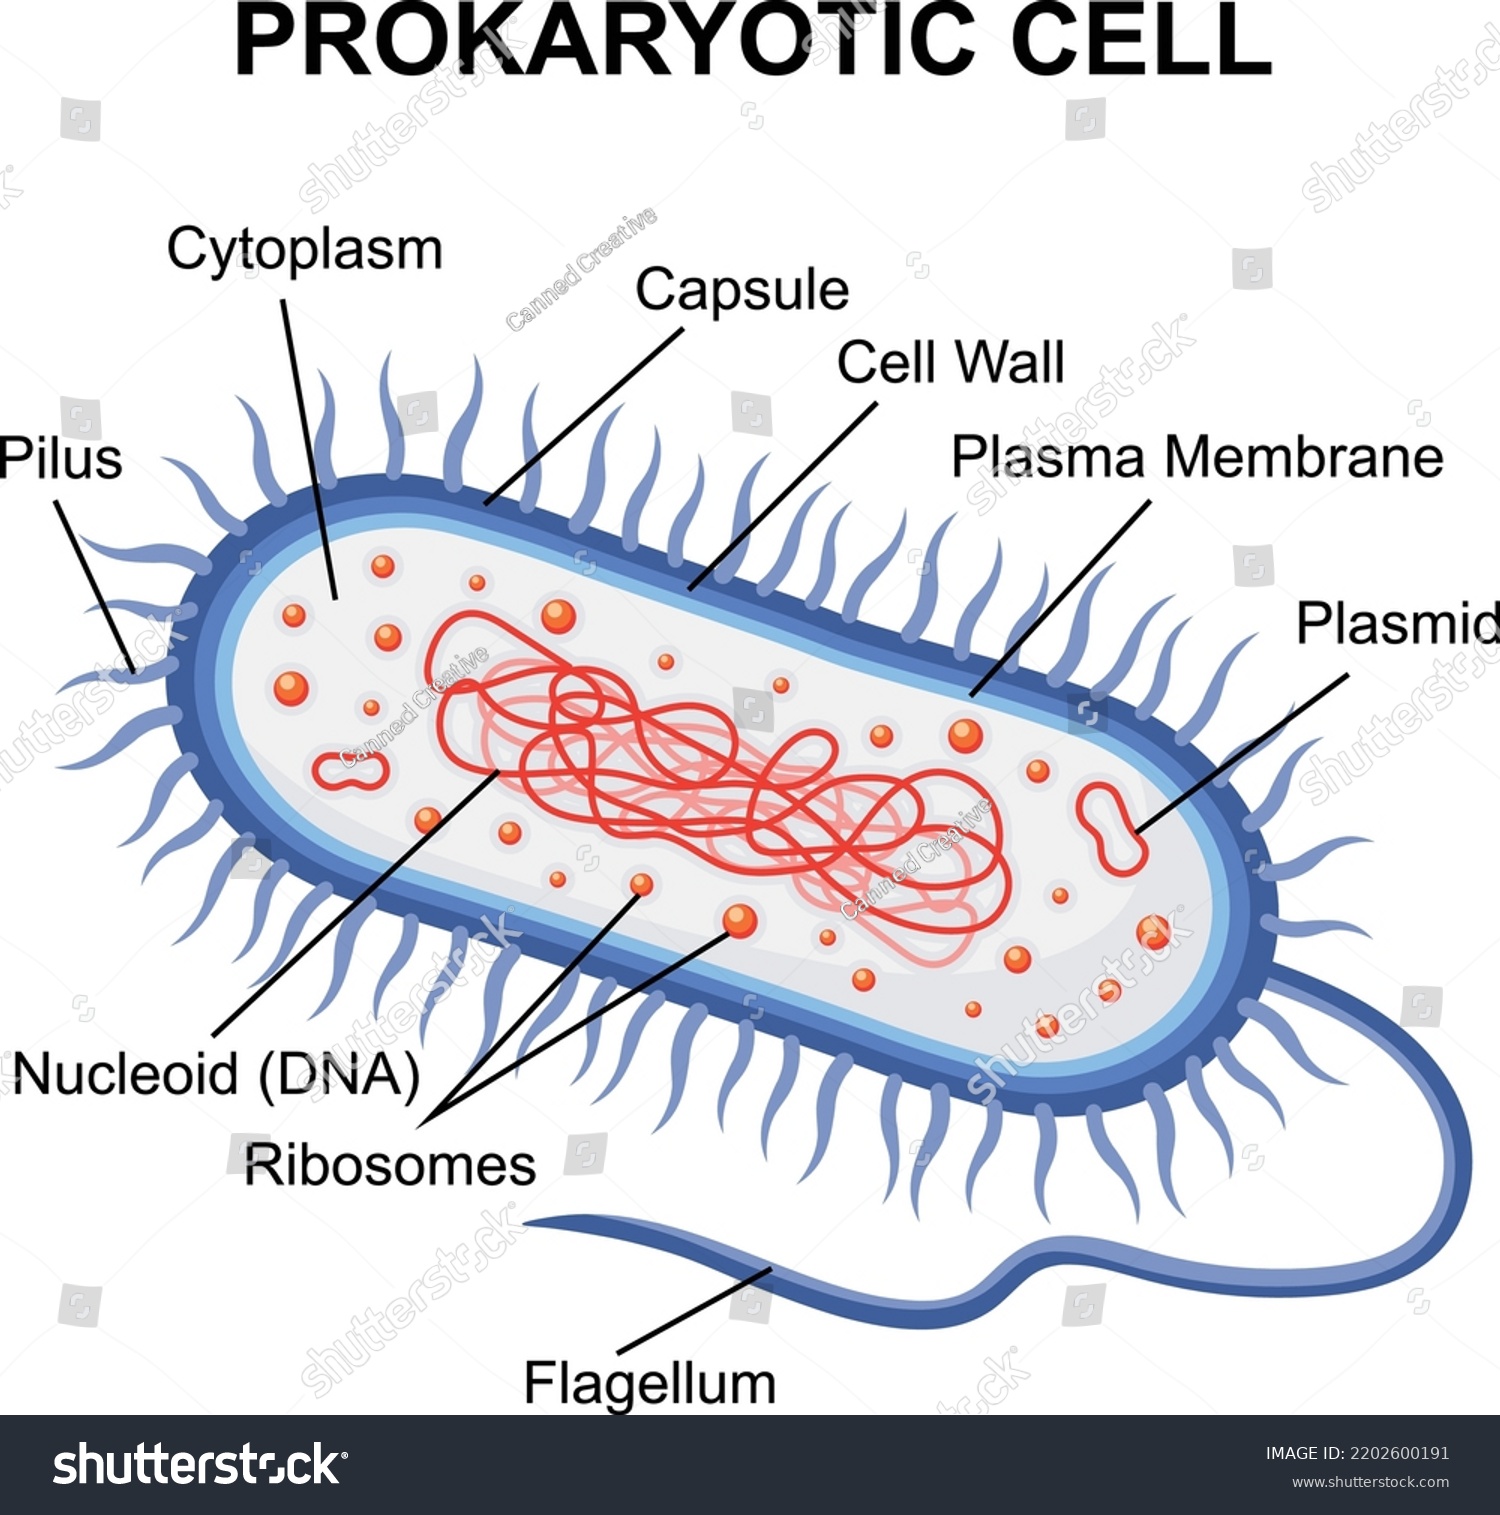 Prokaryotic Cell Structure Diagram Cross Section Stock Vector (Royalty ...